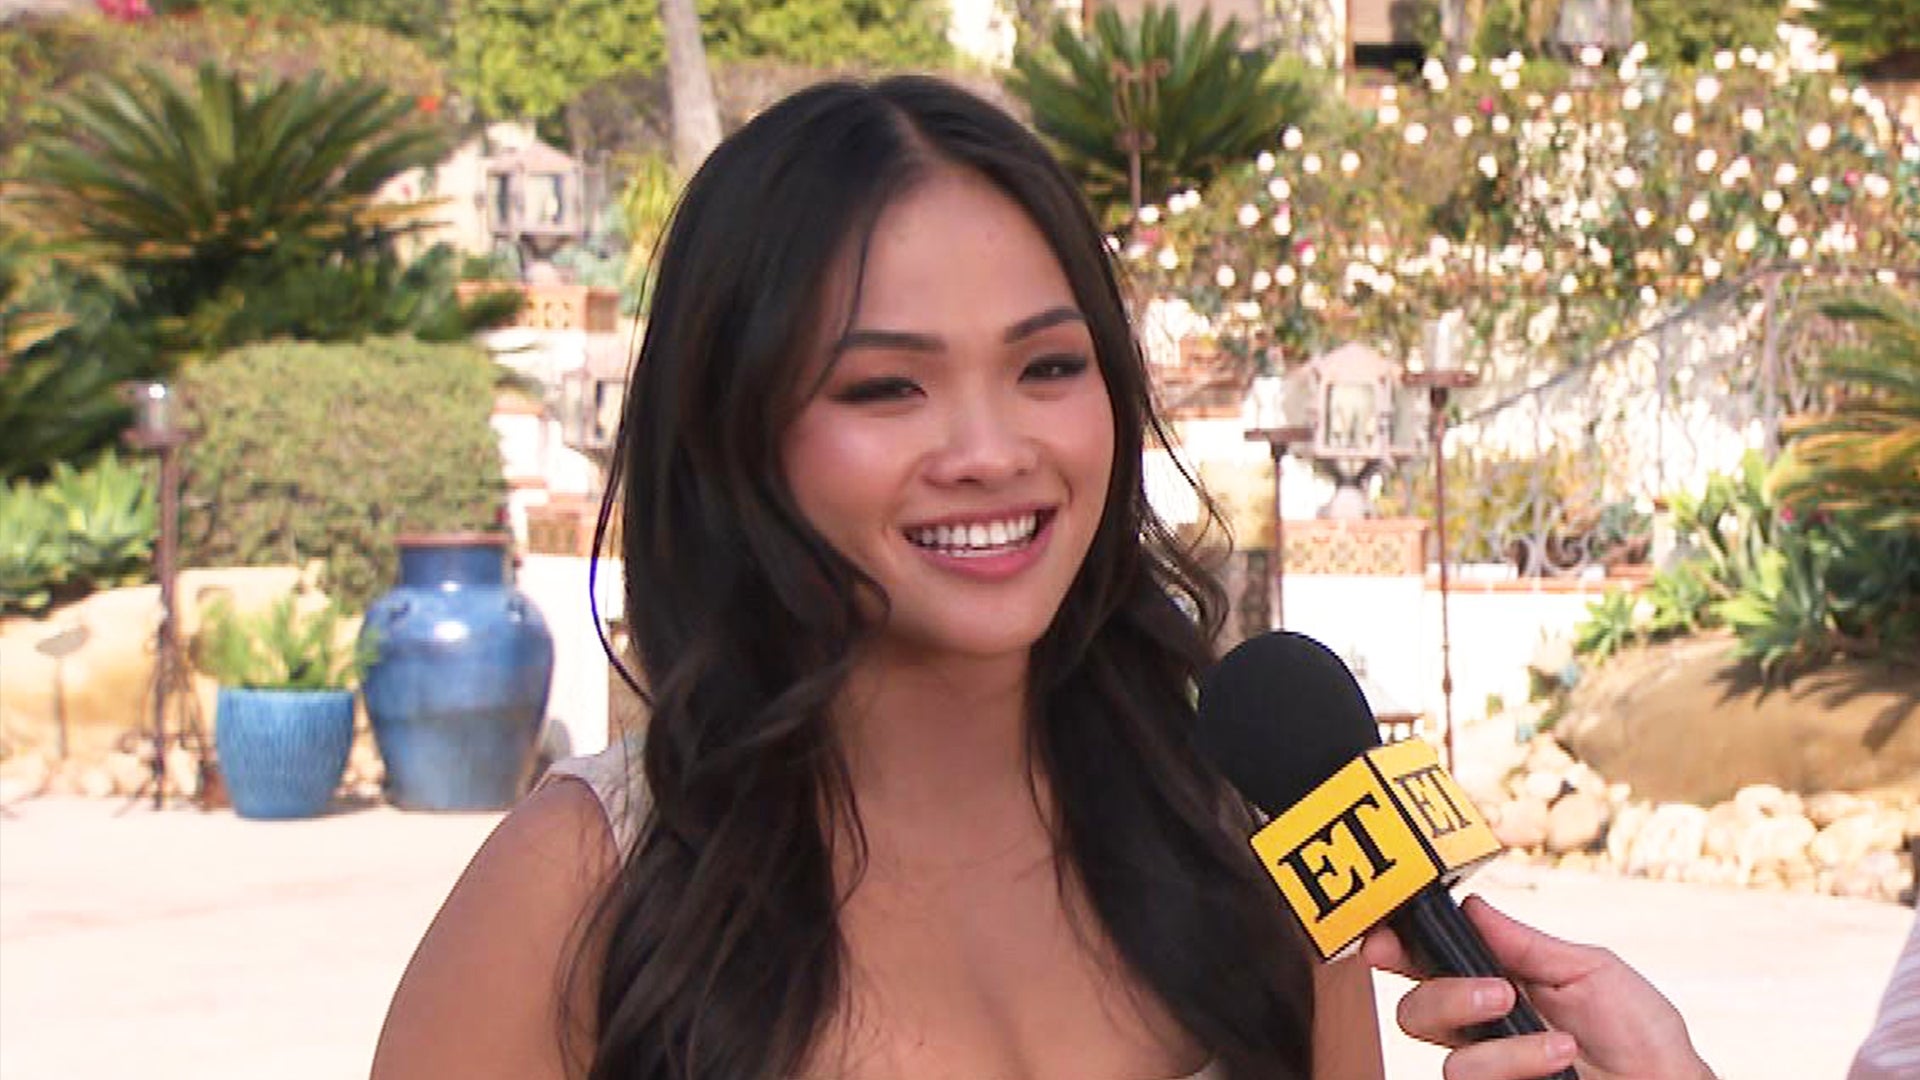 The Bachelorette's Jenn Tran Shares Partner Must-Haves and Deal Breakers as She Kicks Off Filming